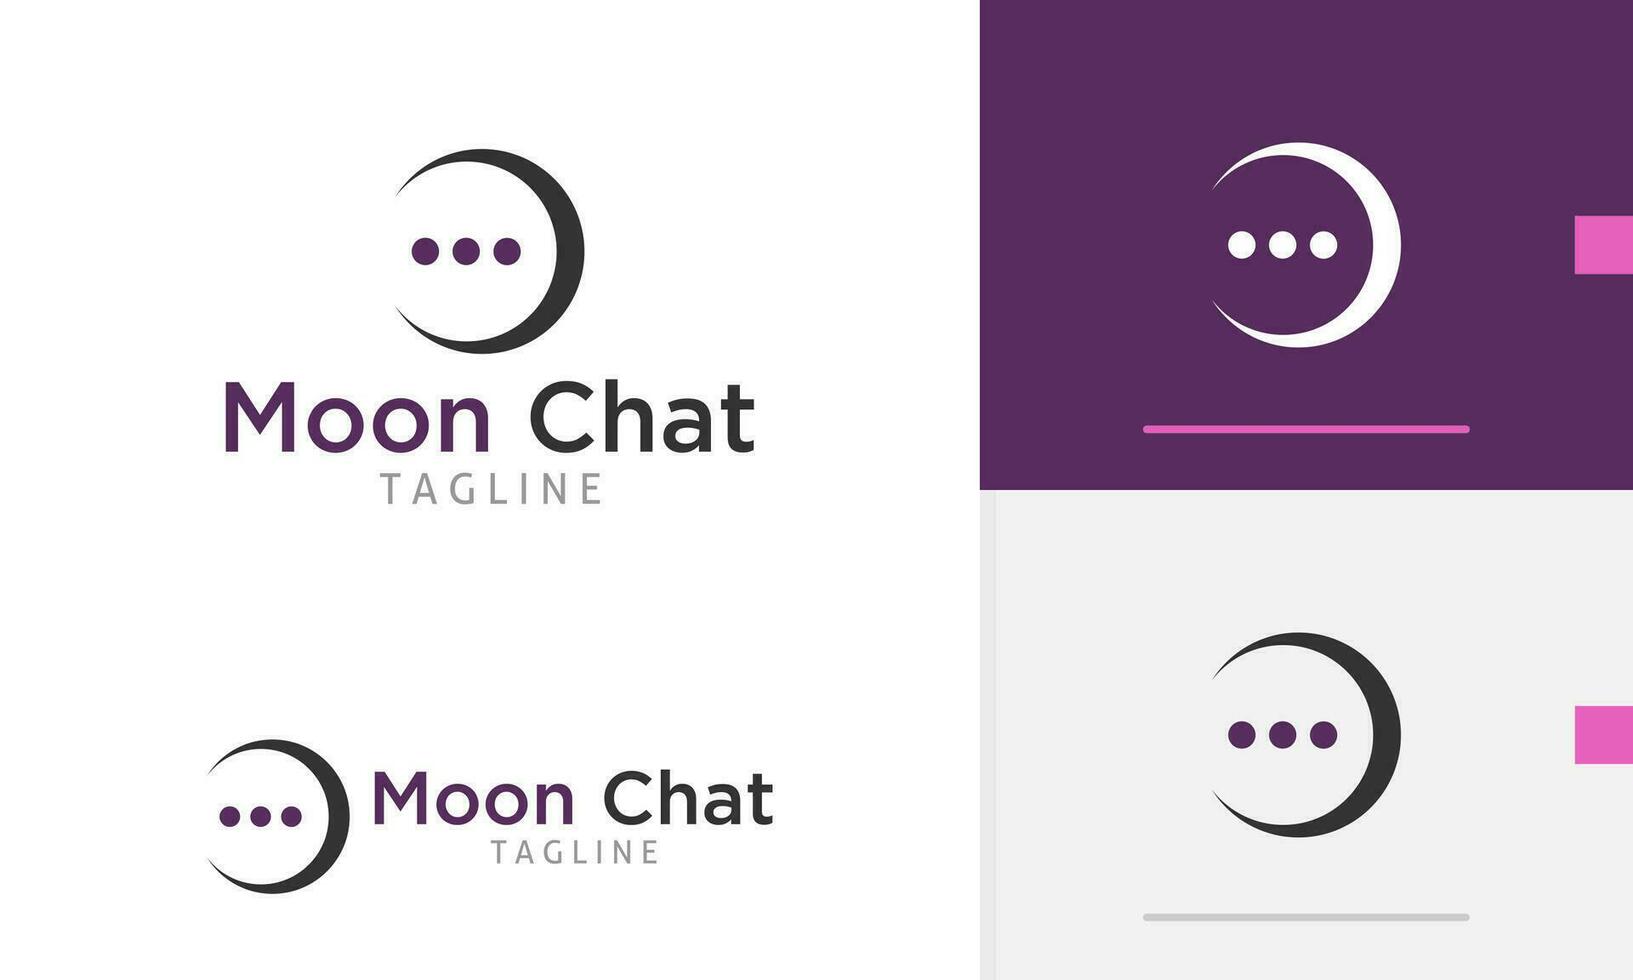 Logo design icon of crescent half moon in the sky with chat bubble message communication community vector